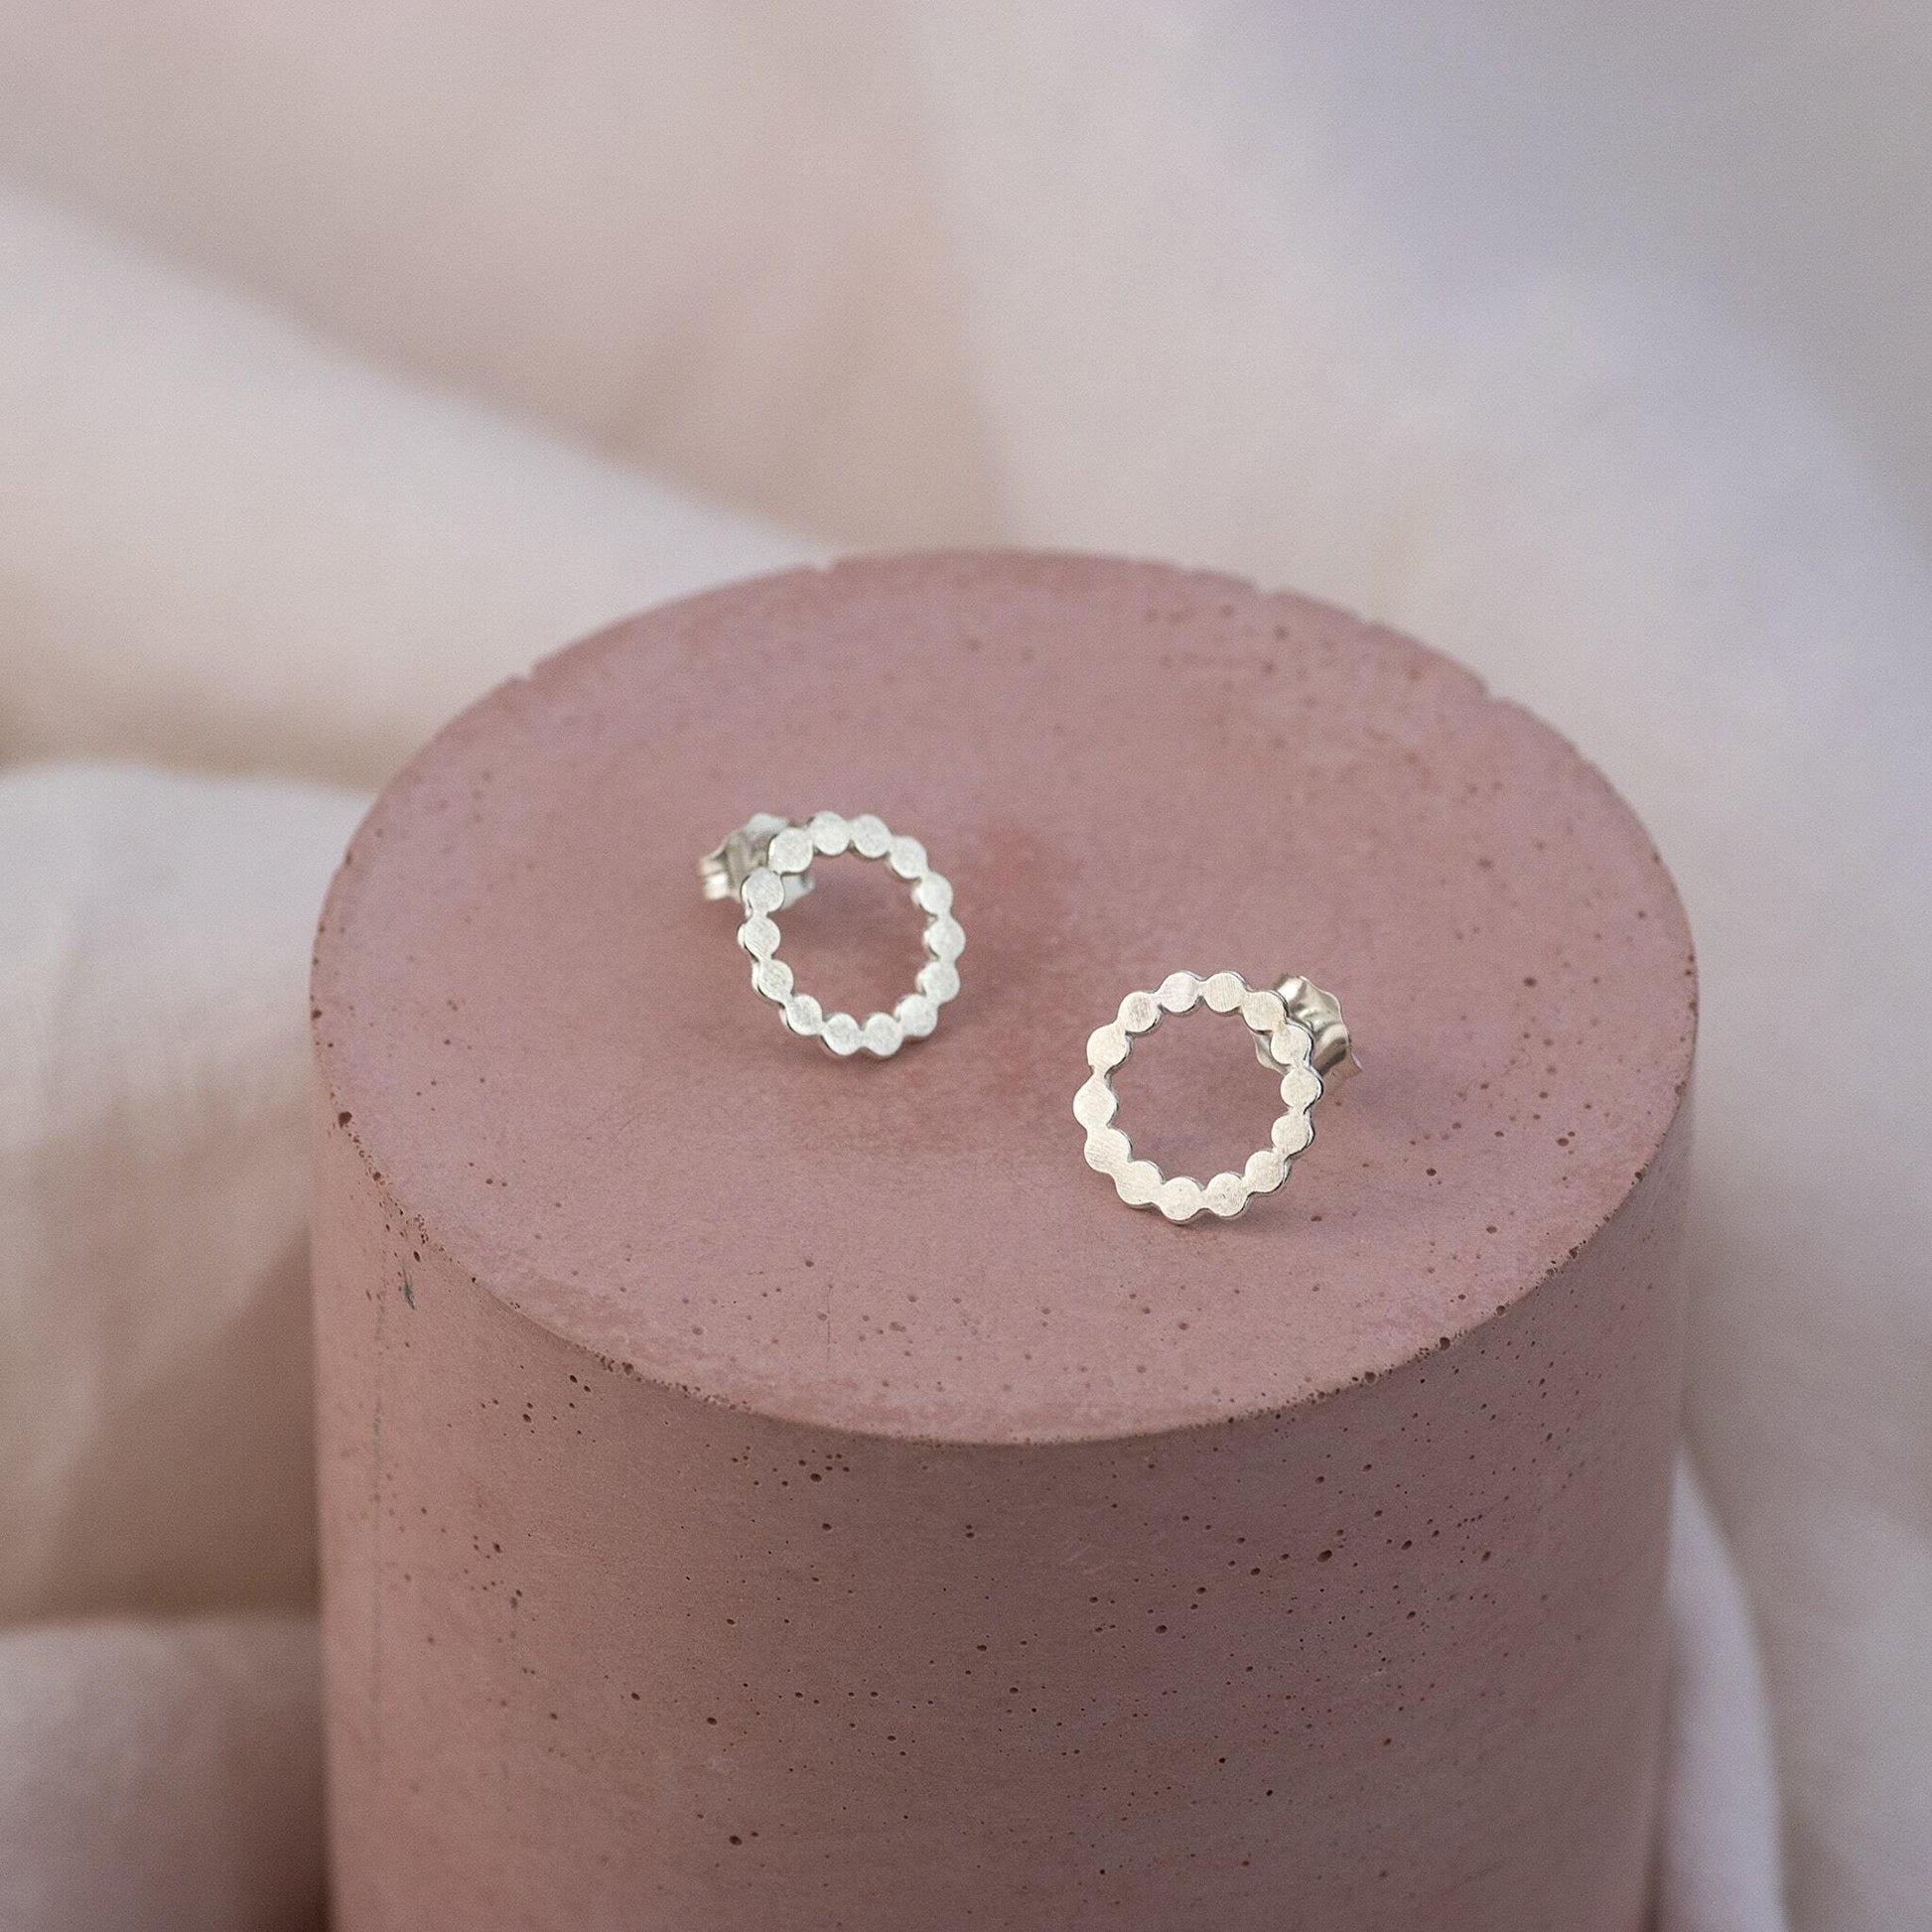 Silver Beaded Halo Stud Earrings - Forever Encircled With Love